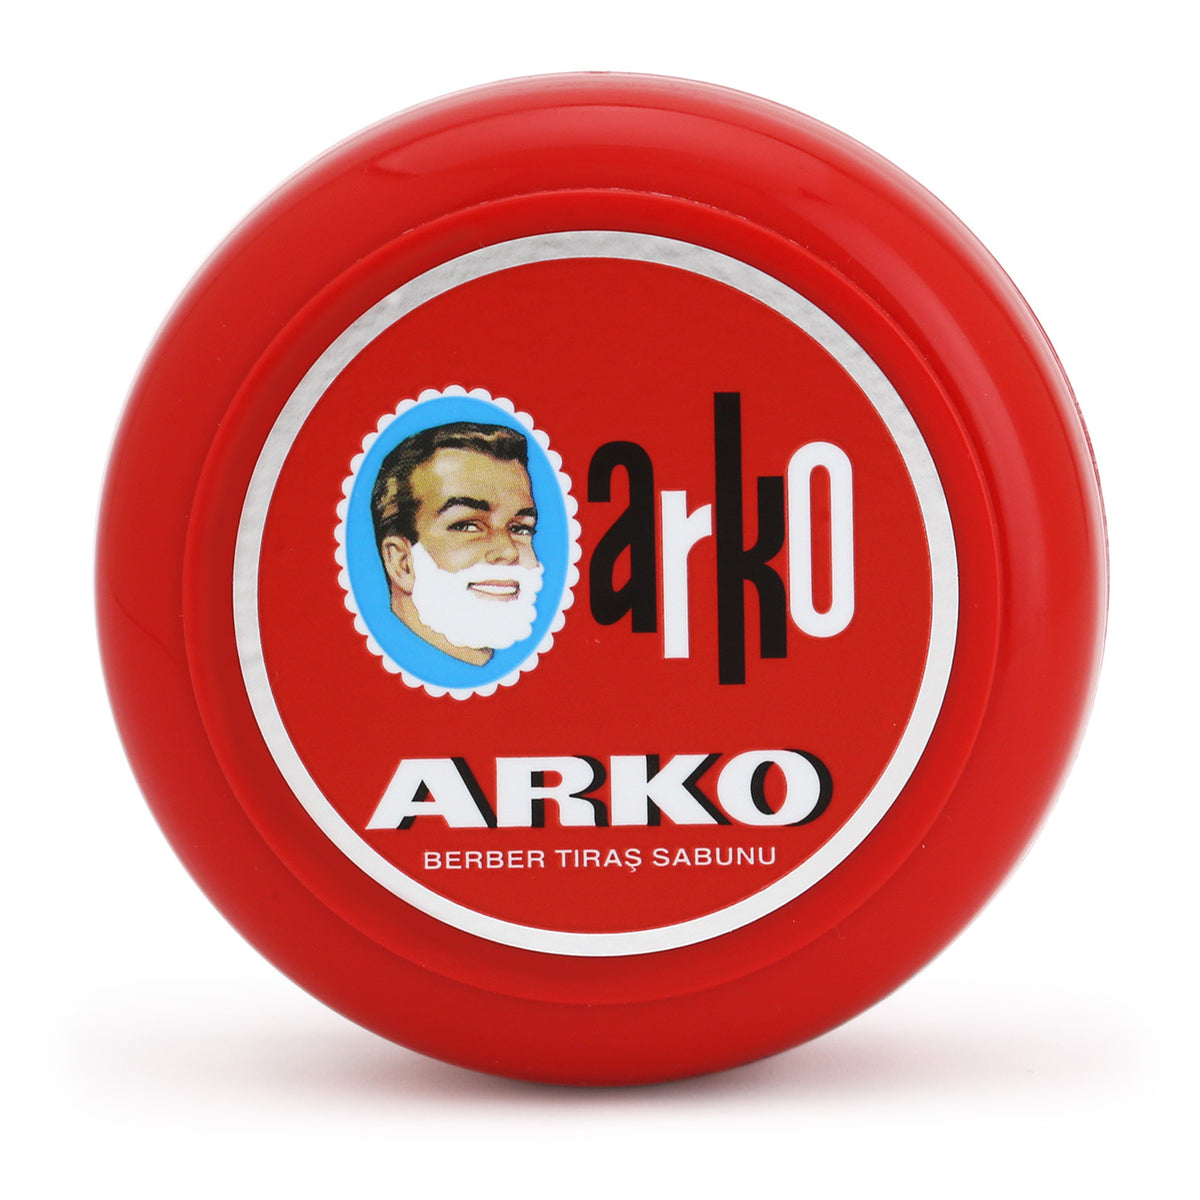 Arko Shave Soap  showing the top label&#39;s lathered man&#39;s face in retro styling